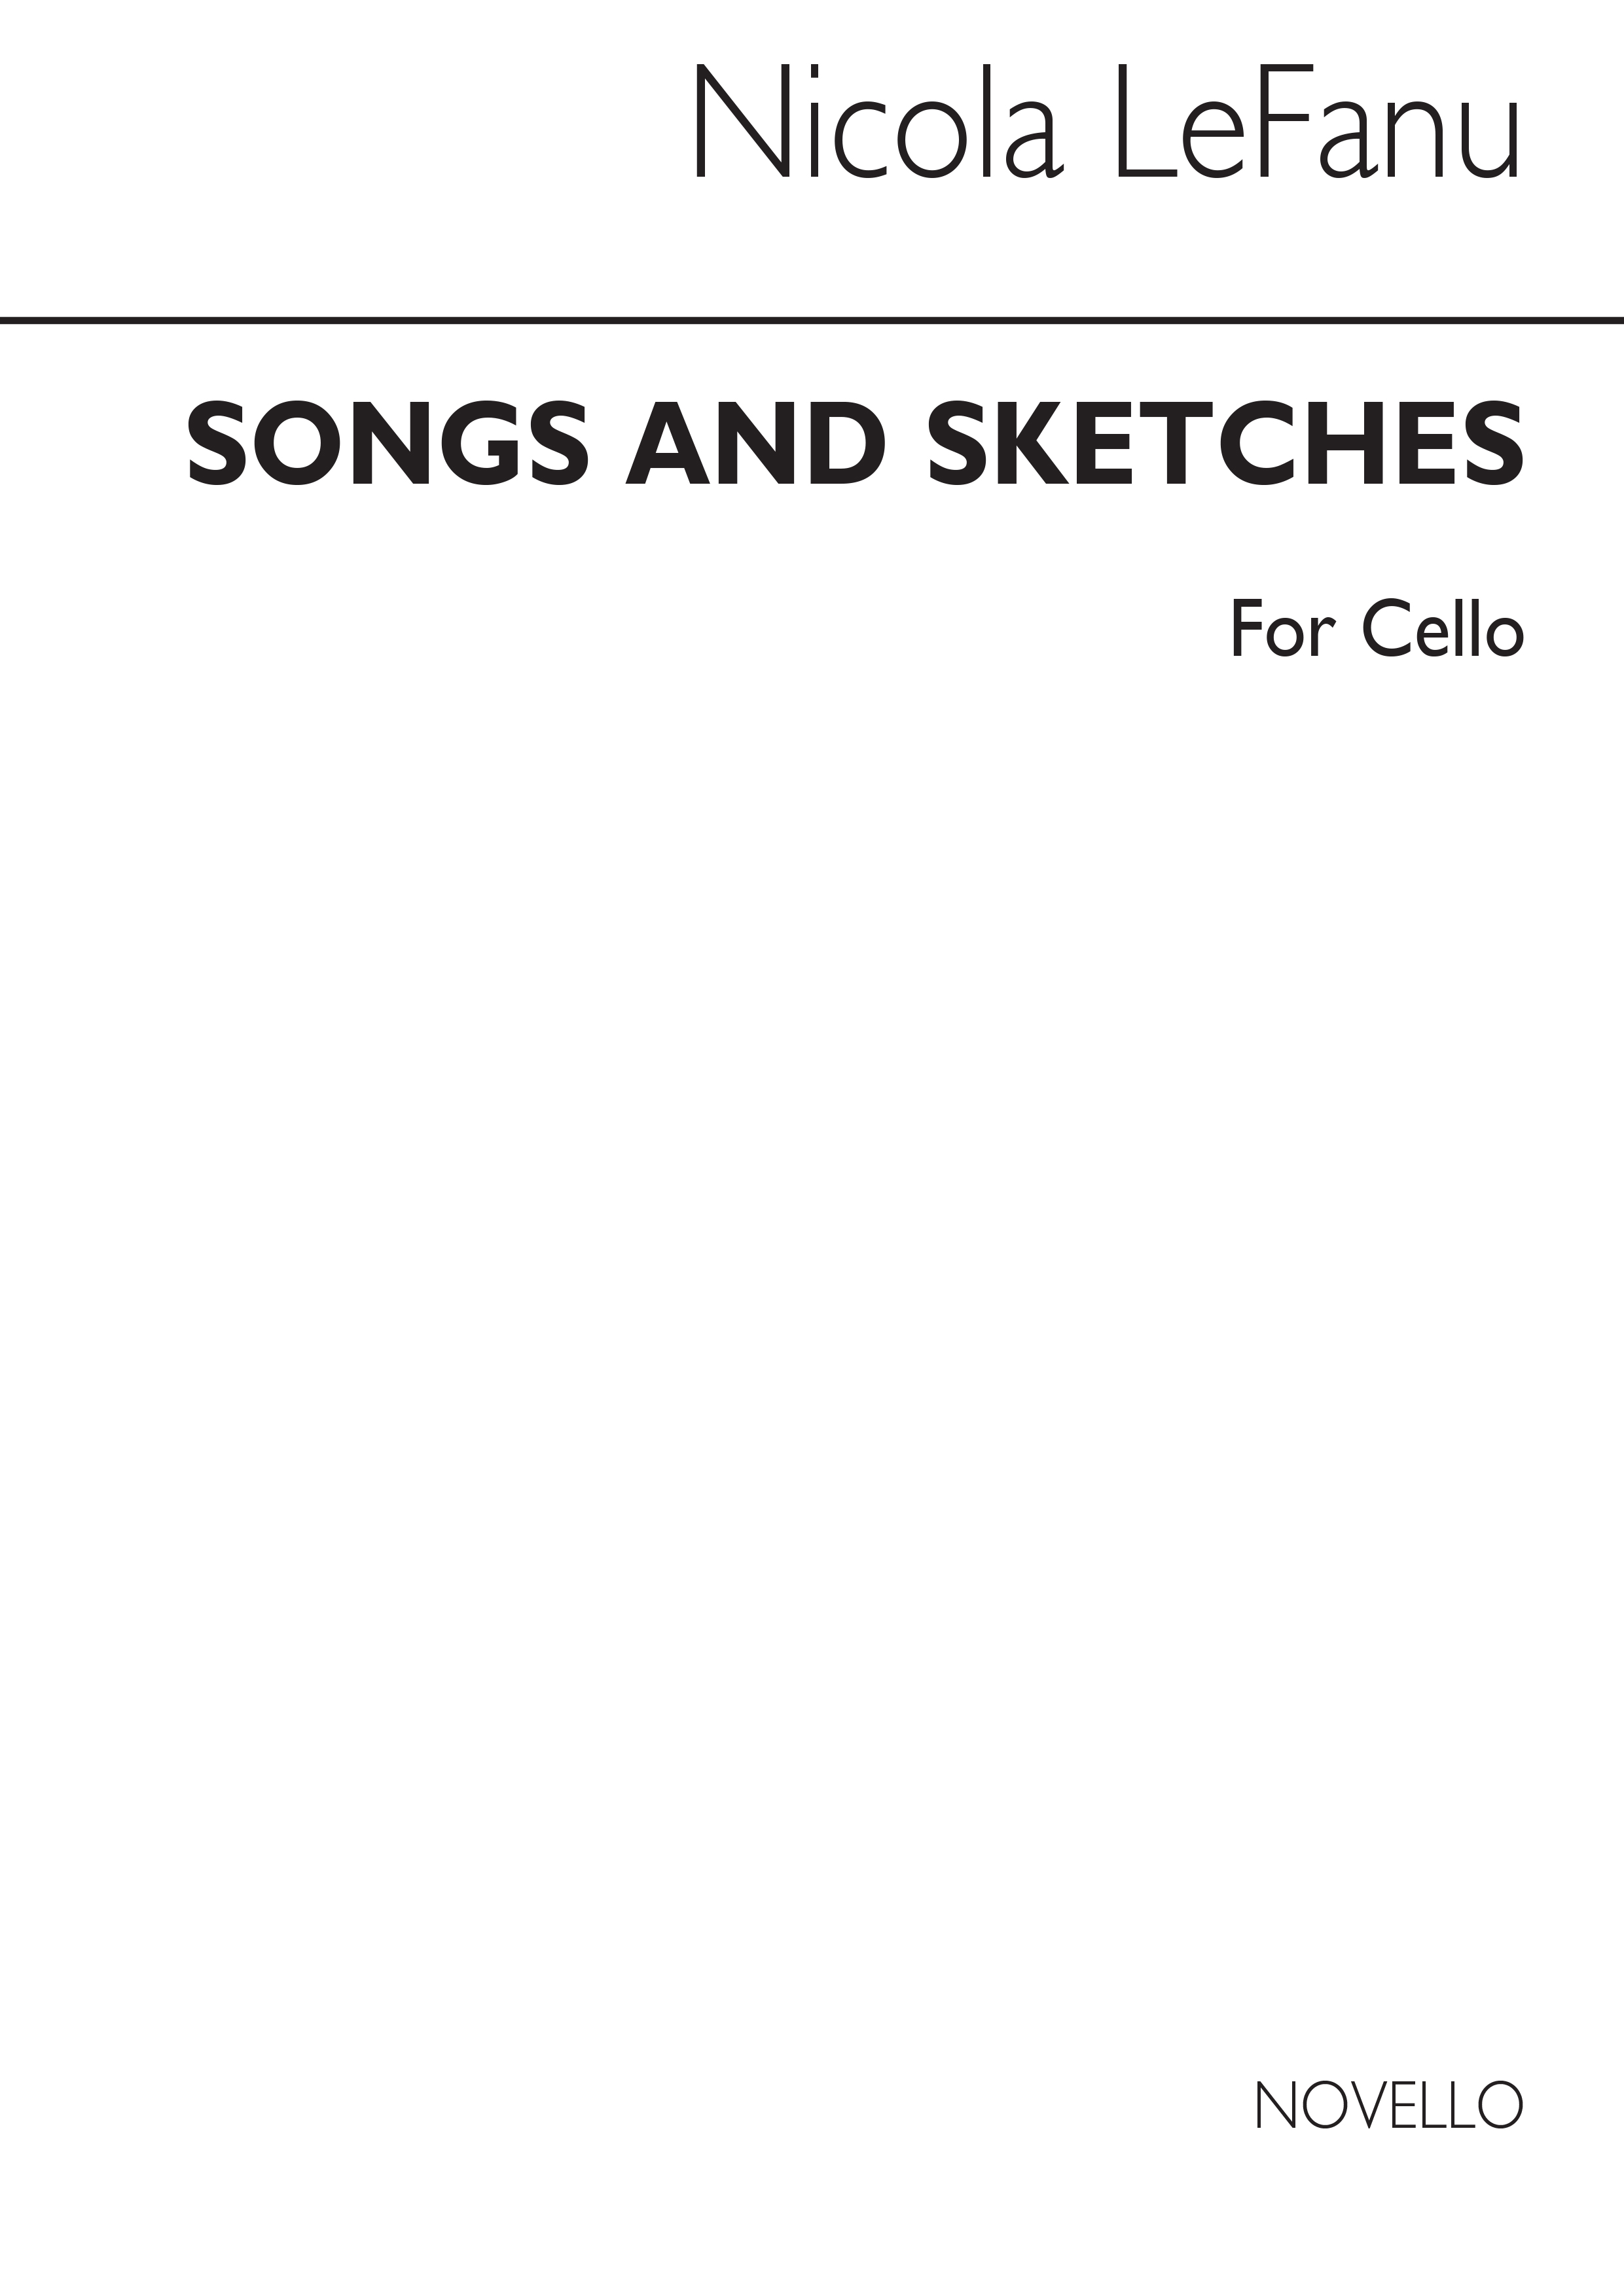 Lefanu: Songs And Sketches For Cellos